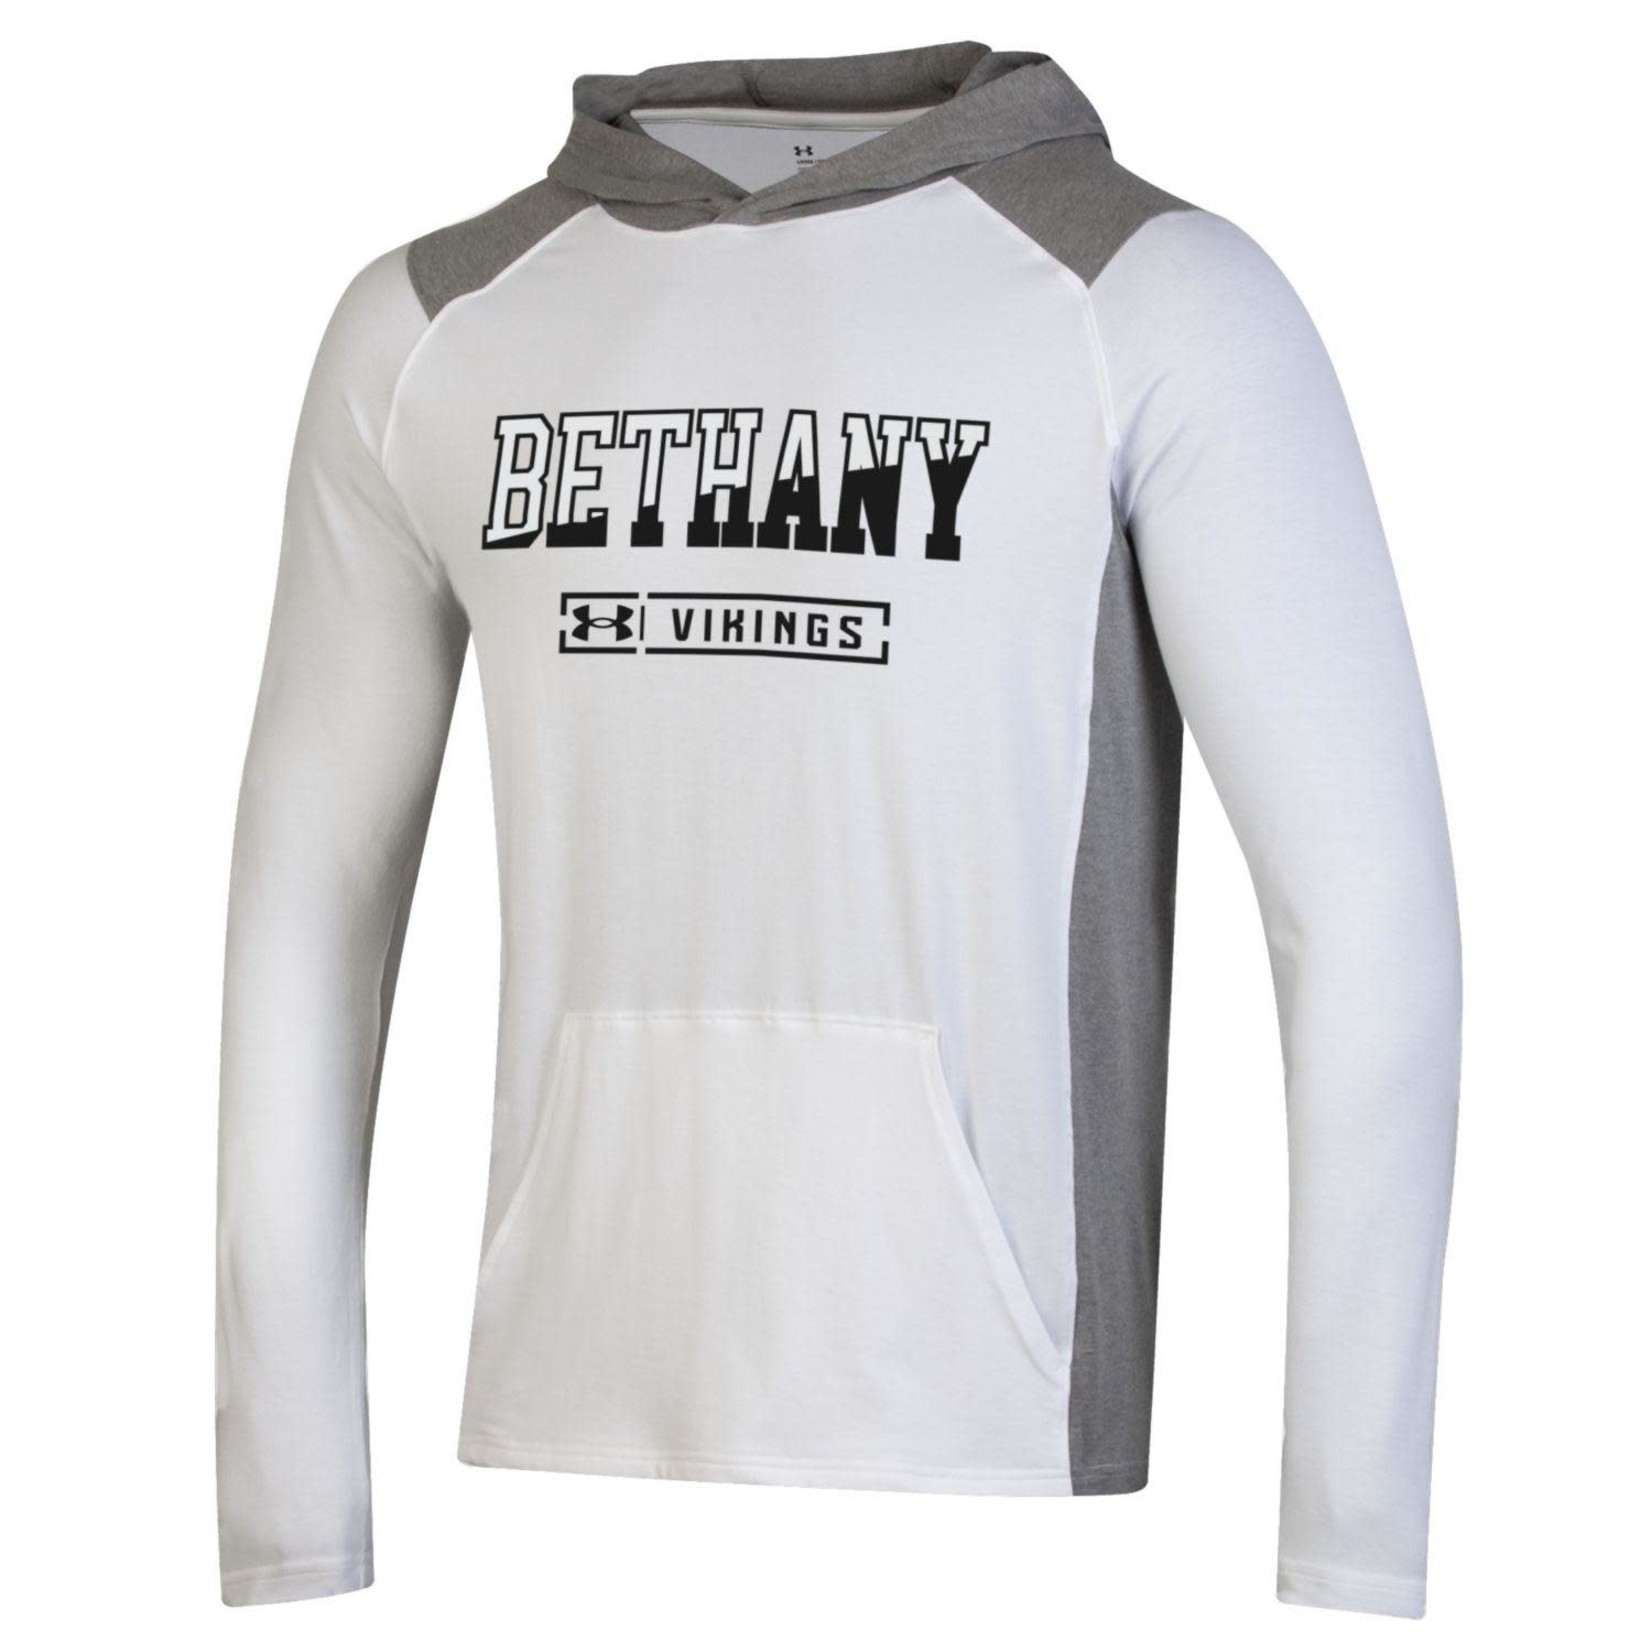 Under Armour Bethany Vikings All Day Long Sleeve Hooded Tee - White with Gray